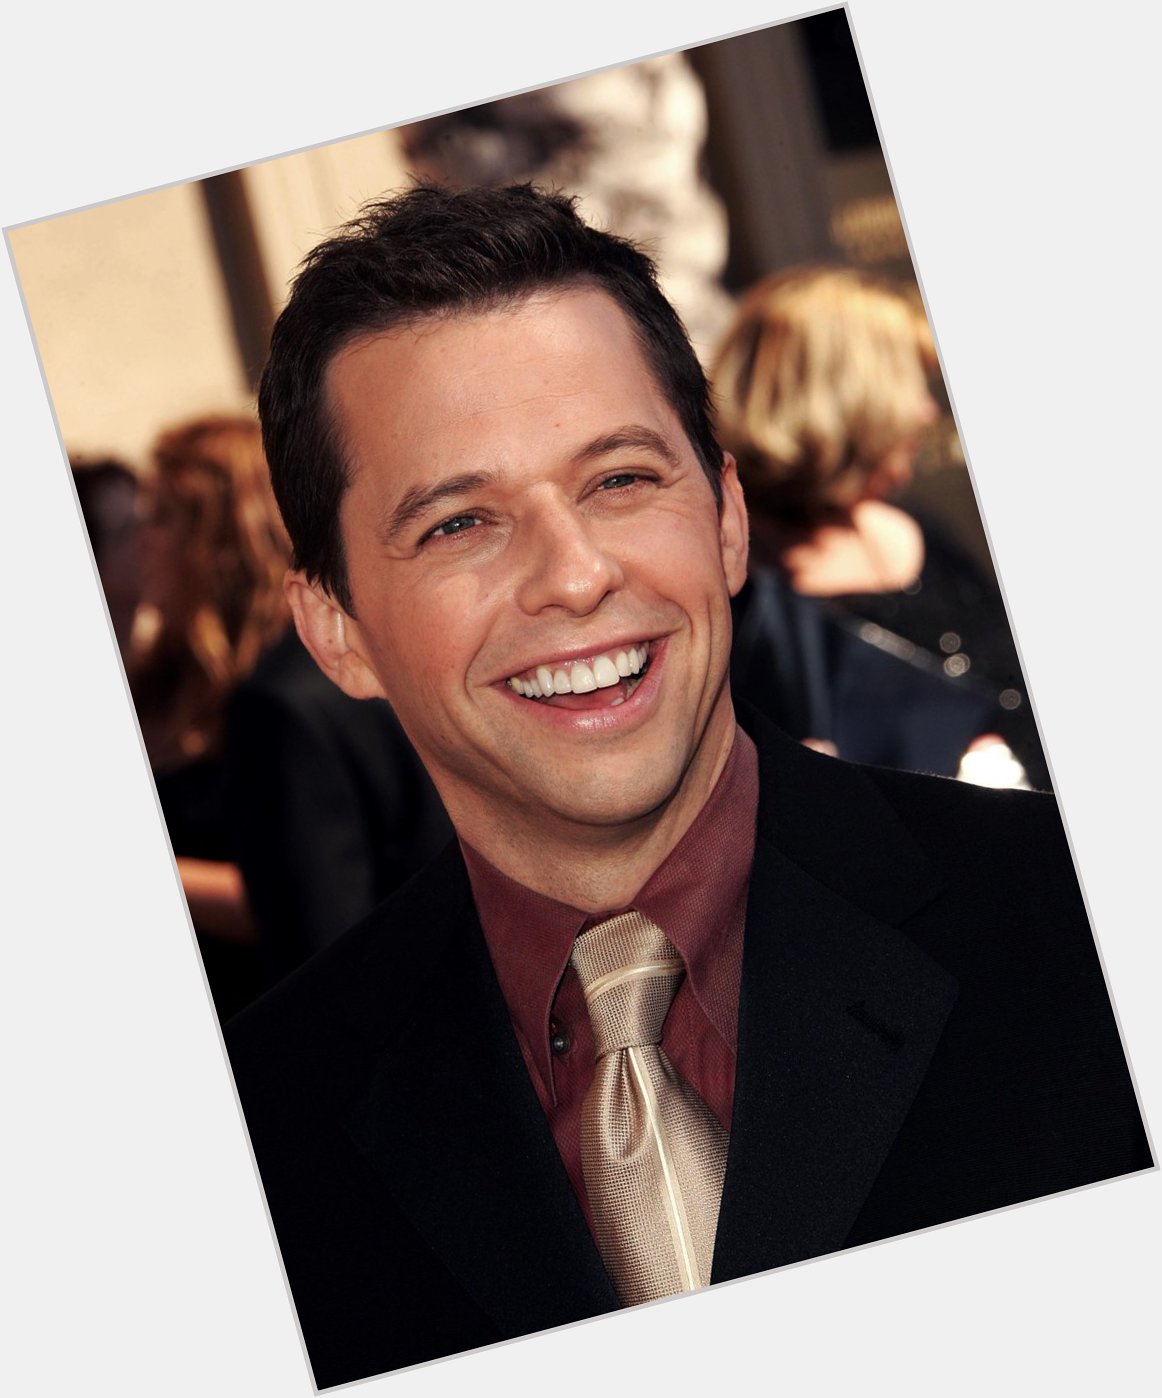 Happy Birthday to Jon Cryer, who turns 50 today! 